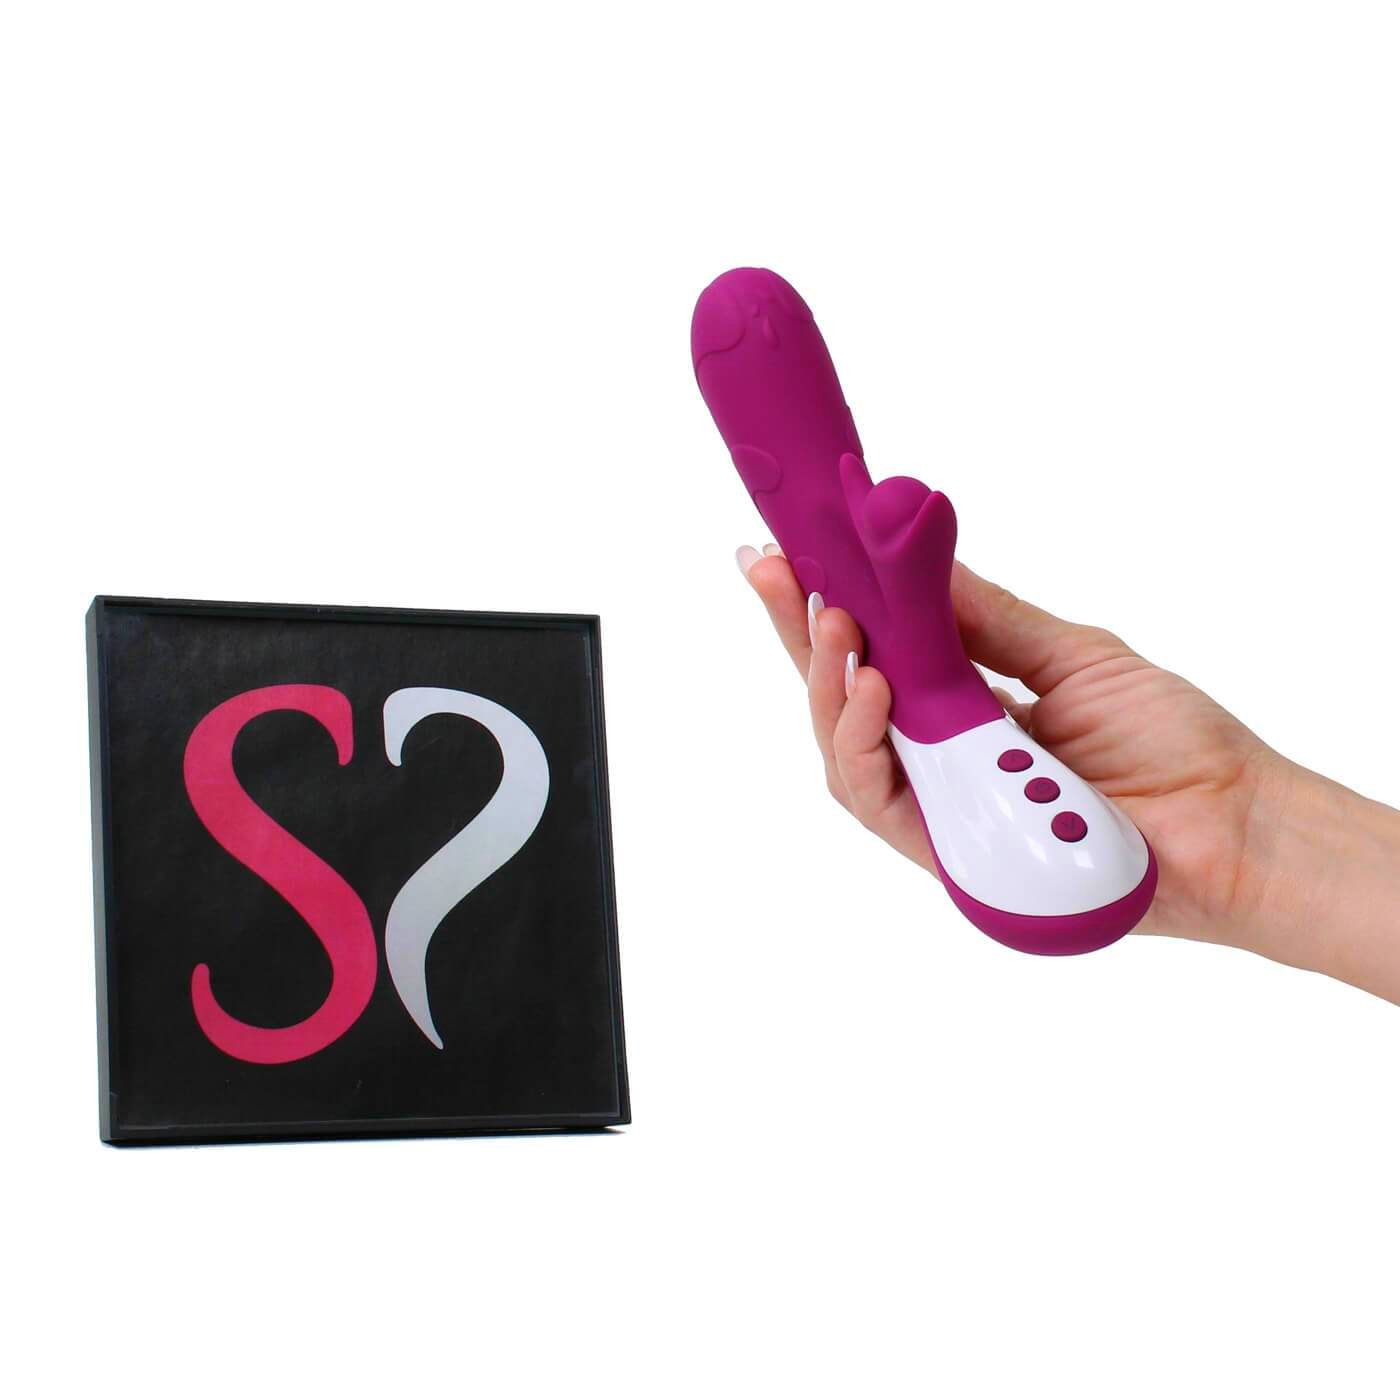 DUALITY 11 Function Extra Quiet Rechargeable Rabbit Vibrator